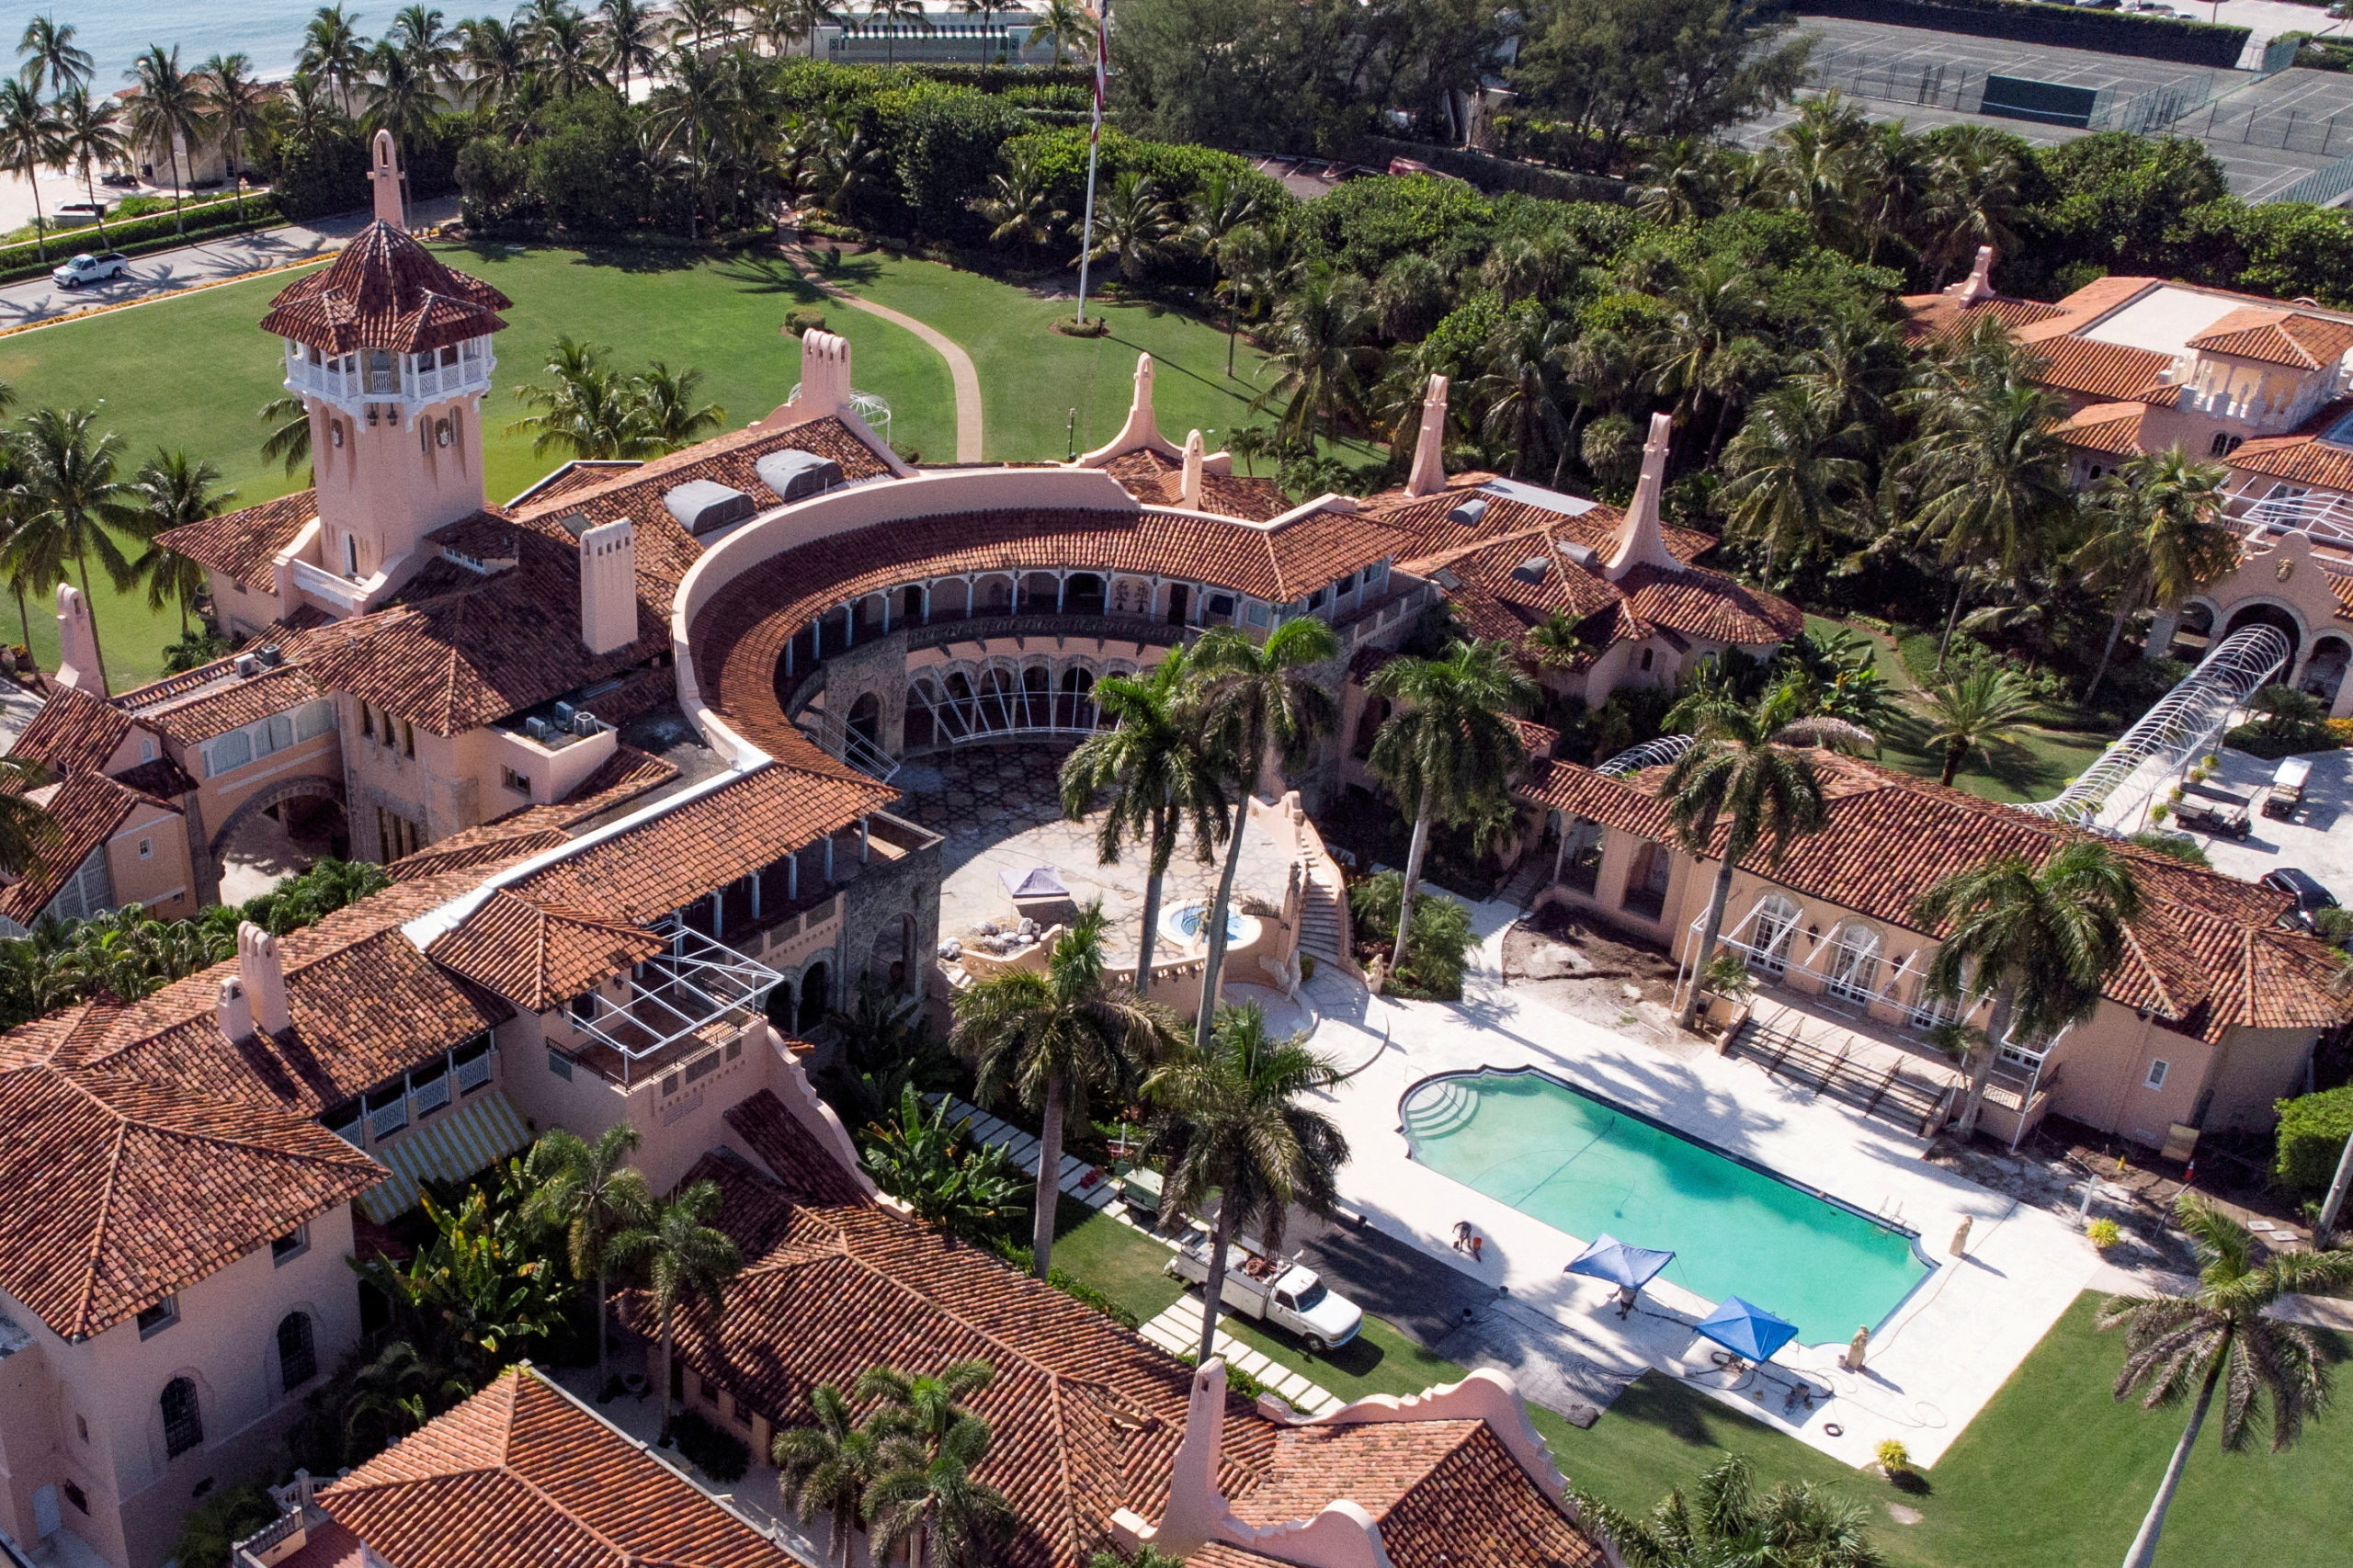 FILE PHOTO: An aerial view of former U.S. President Donald Trump's Mar-a-Lago home after Trump said that FBI agents searched it, in Palm Beach, Florida, U.S. August 15, 2022. REUTERS/Marco Bello/File Photo